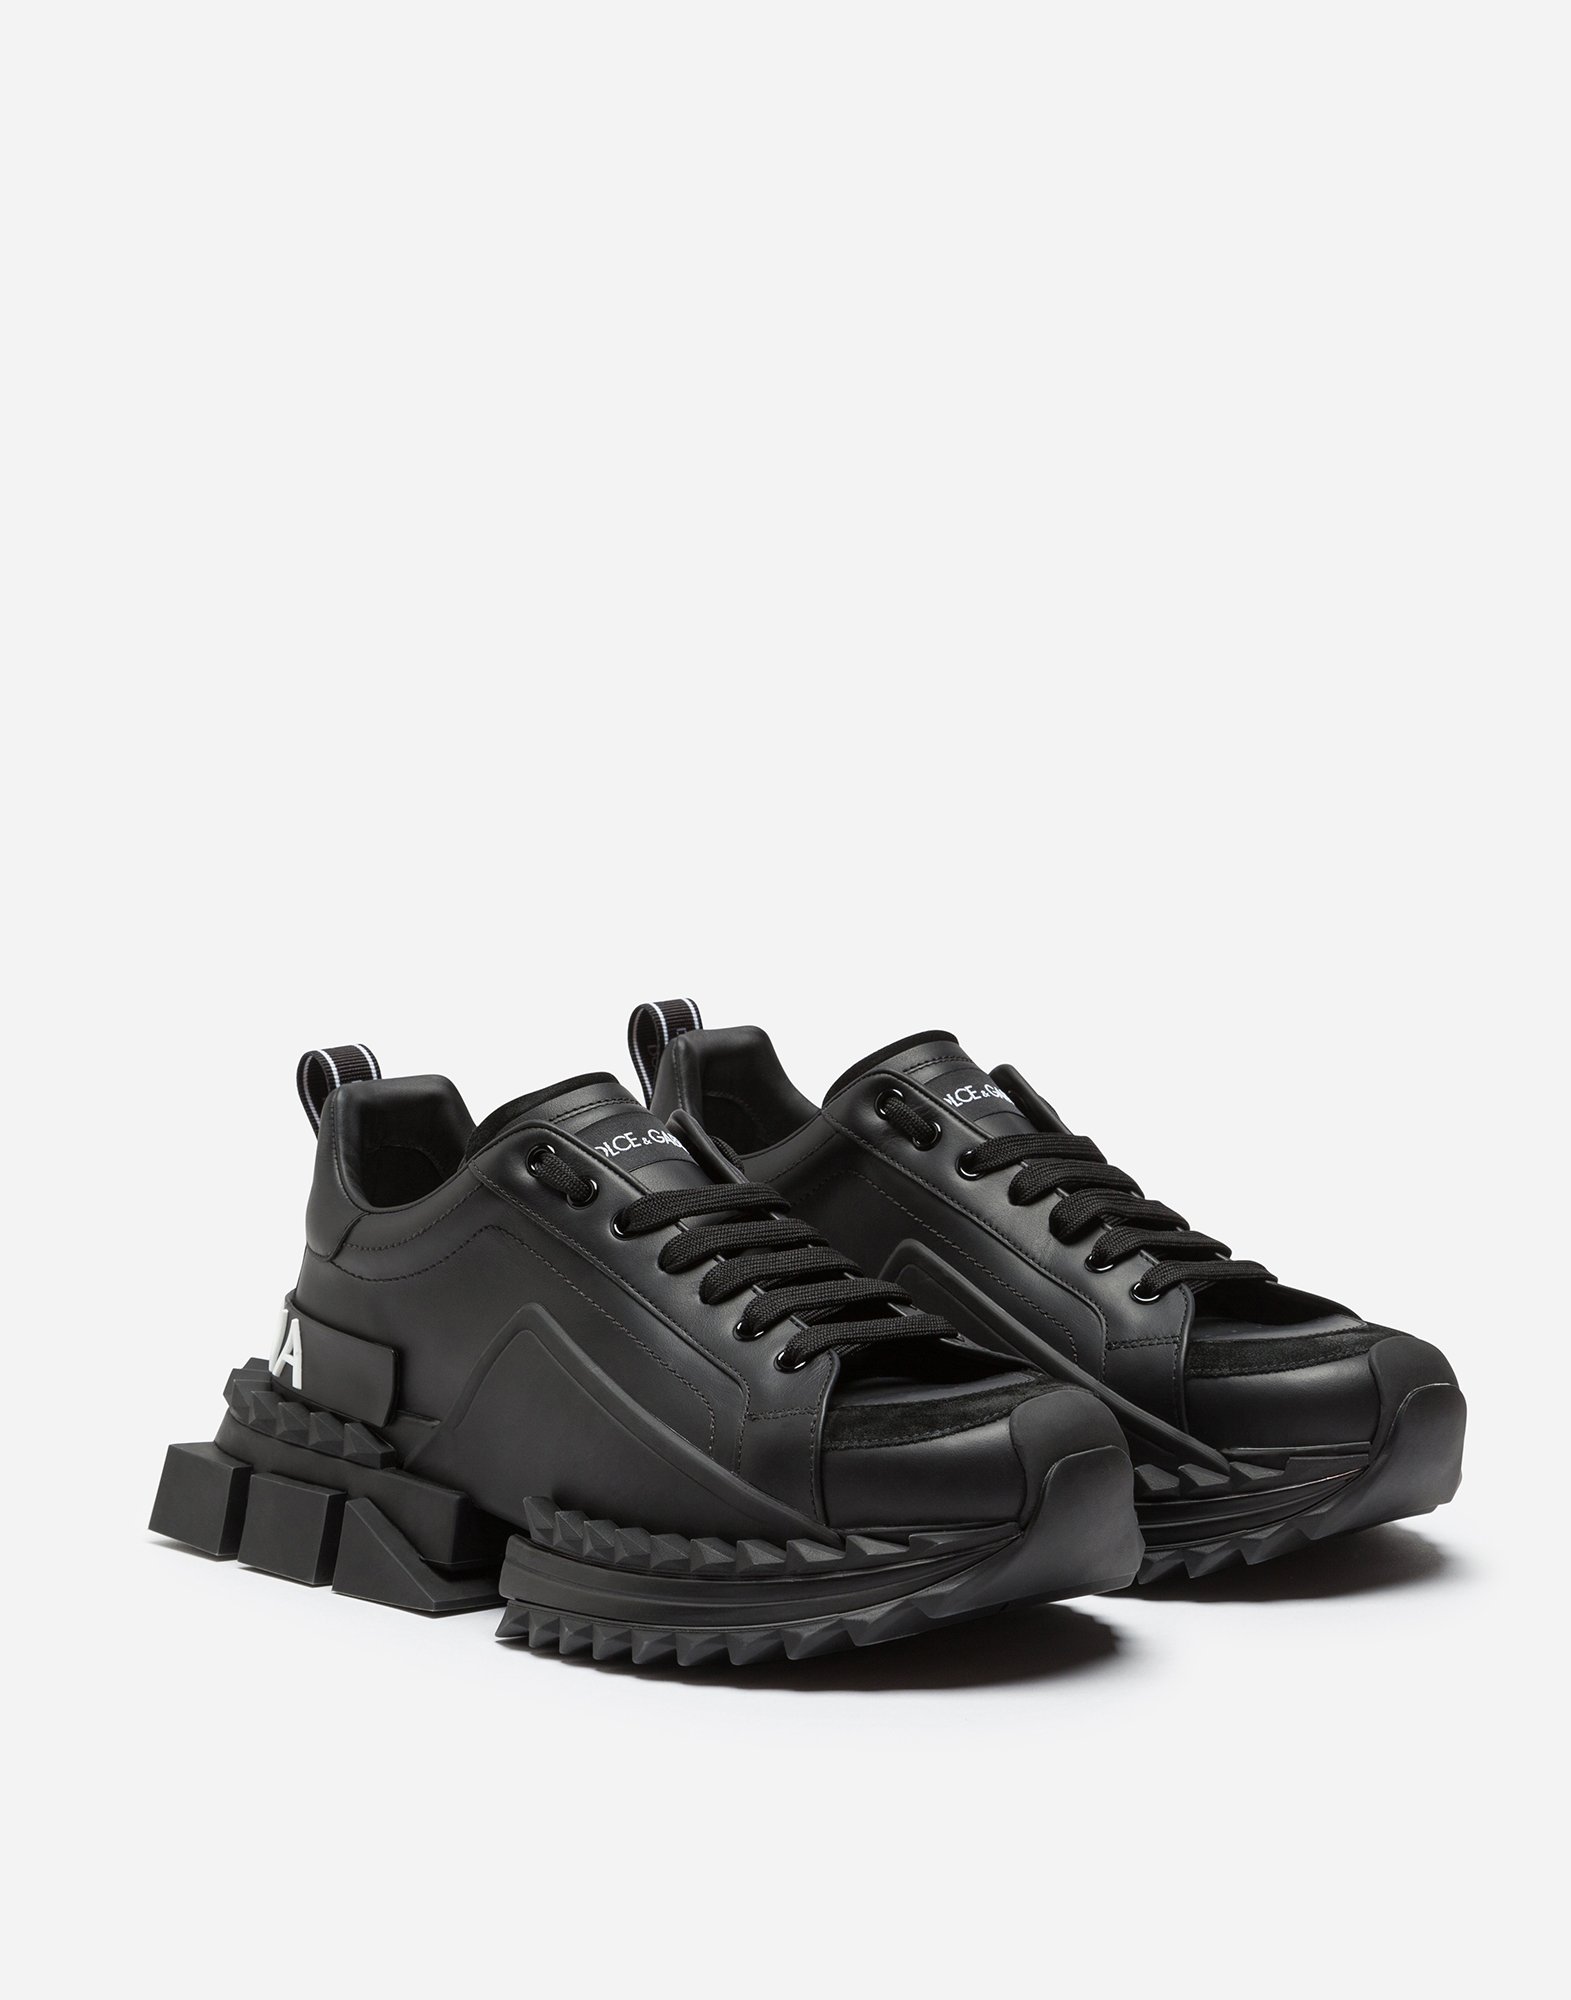 dolce and gabbana mens black sneakers